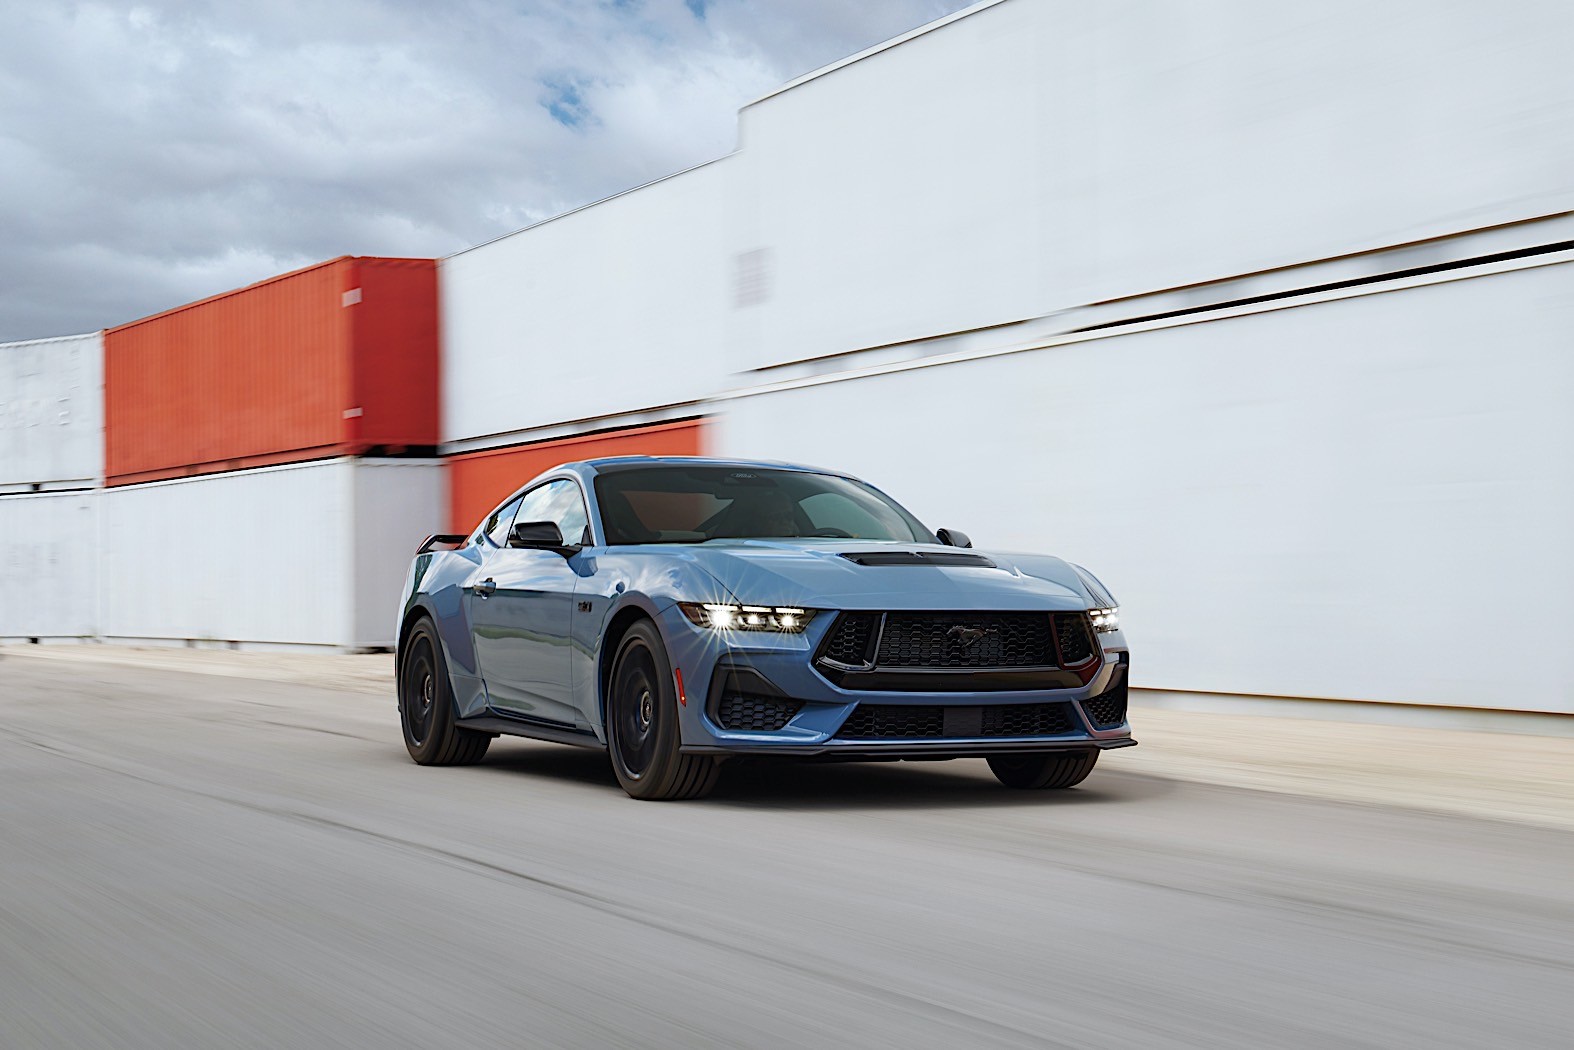 Honest Dealer Selling 2024 Ford Mustang Dark Horse at MSRP, GT and EB